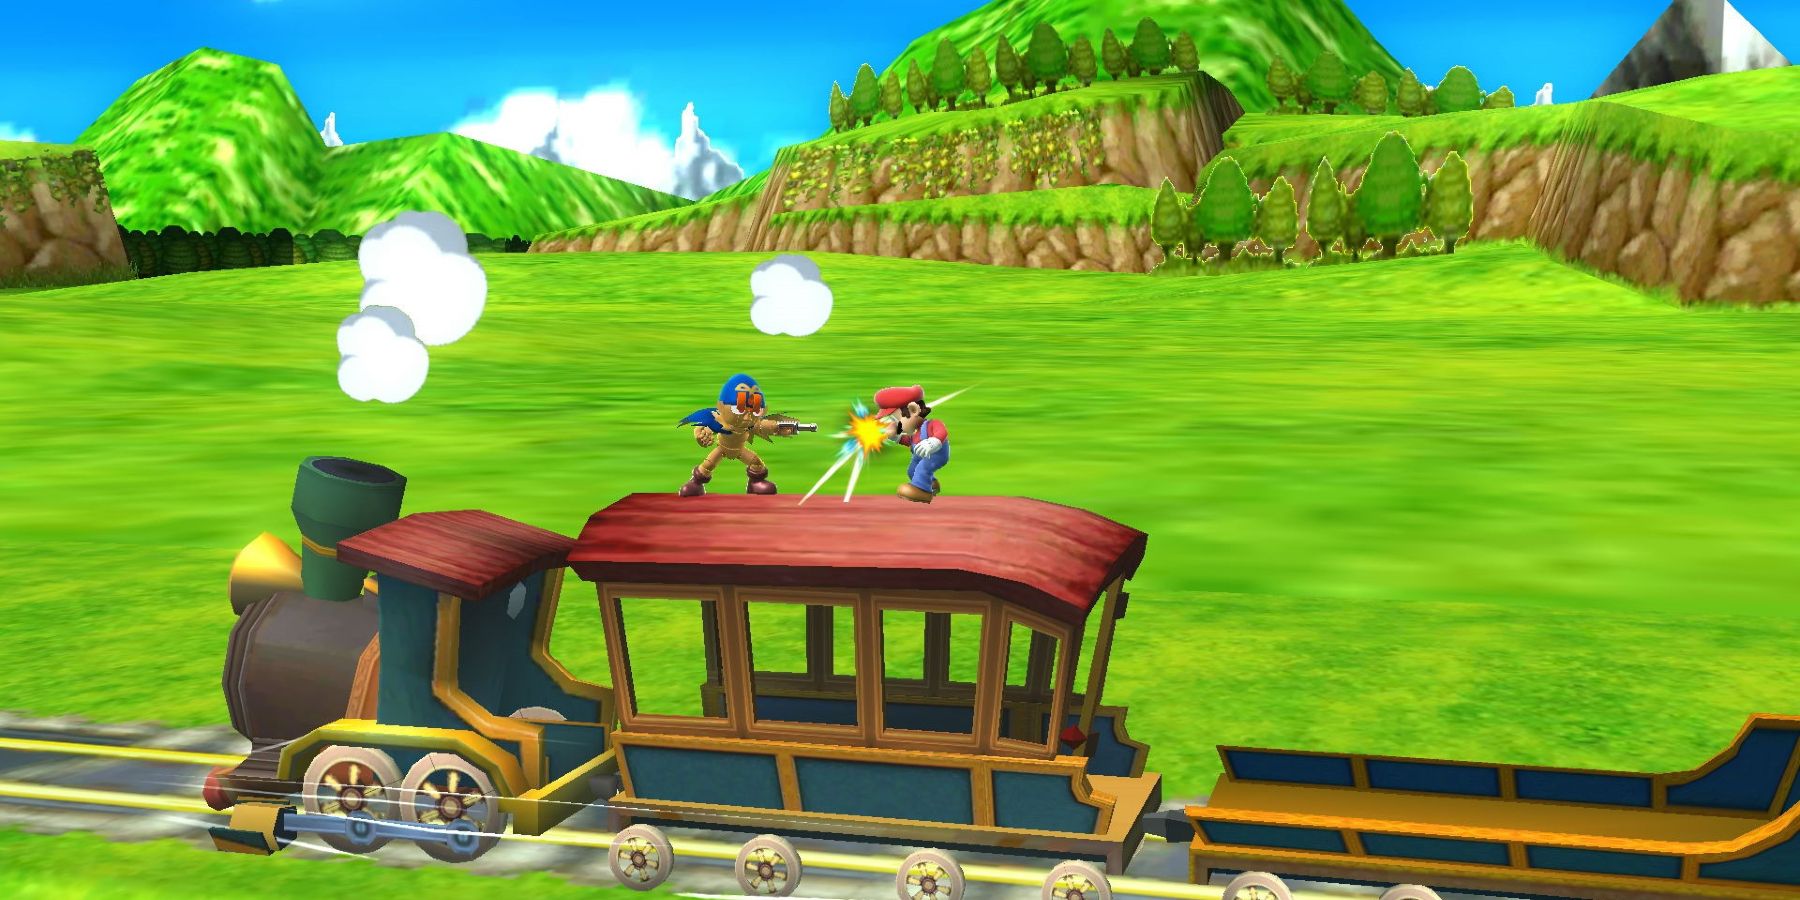 Characters do battle in the Spirit Train stage of Super Smash Bros. Ultimate.